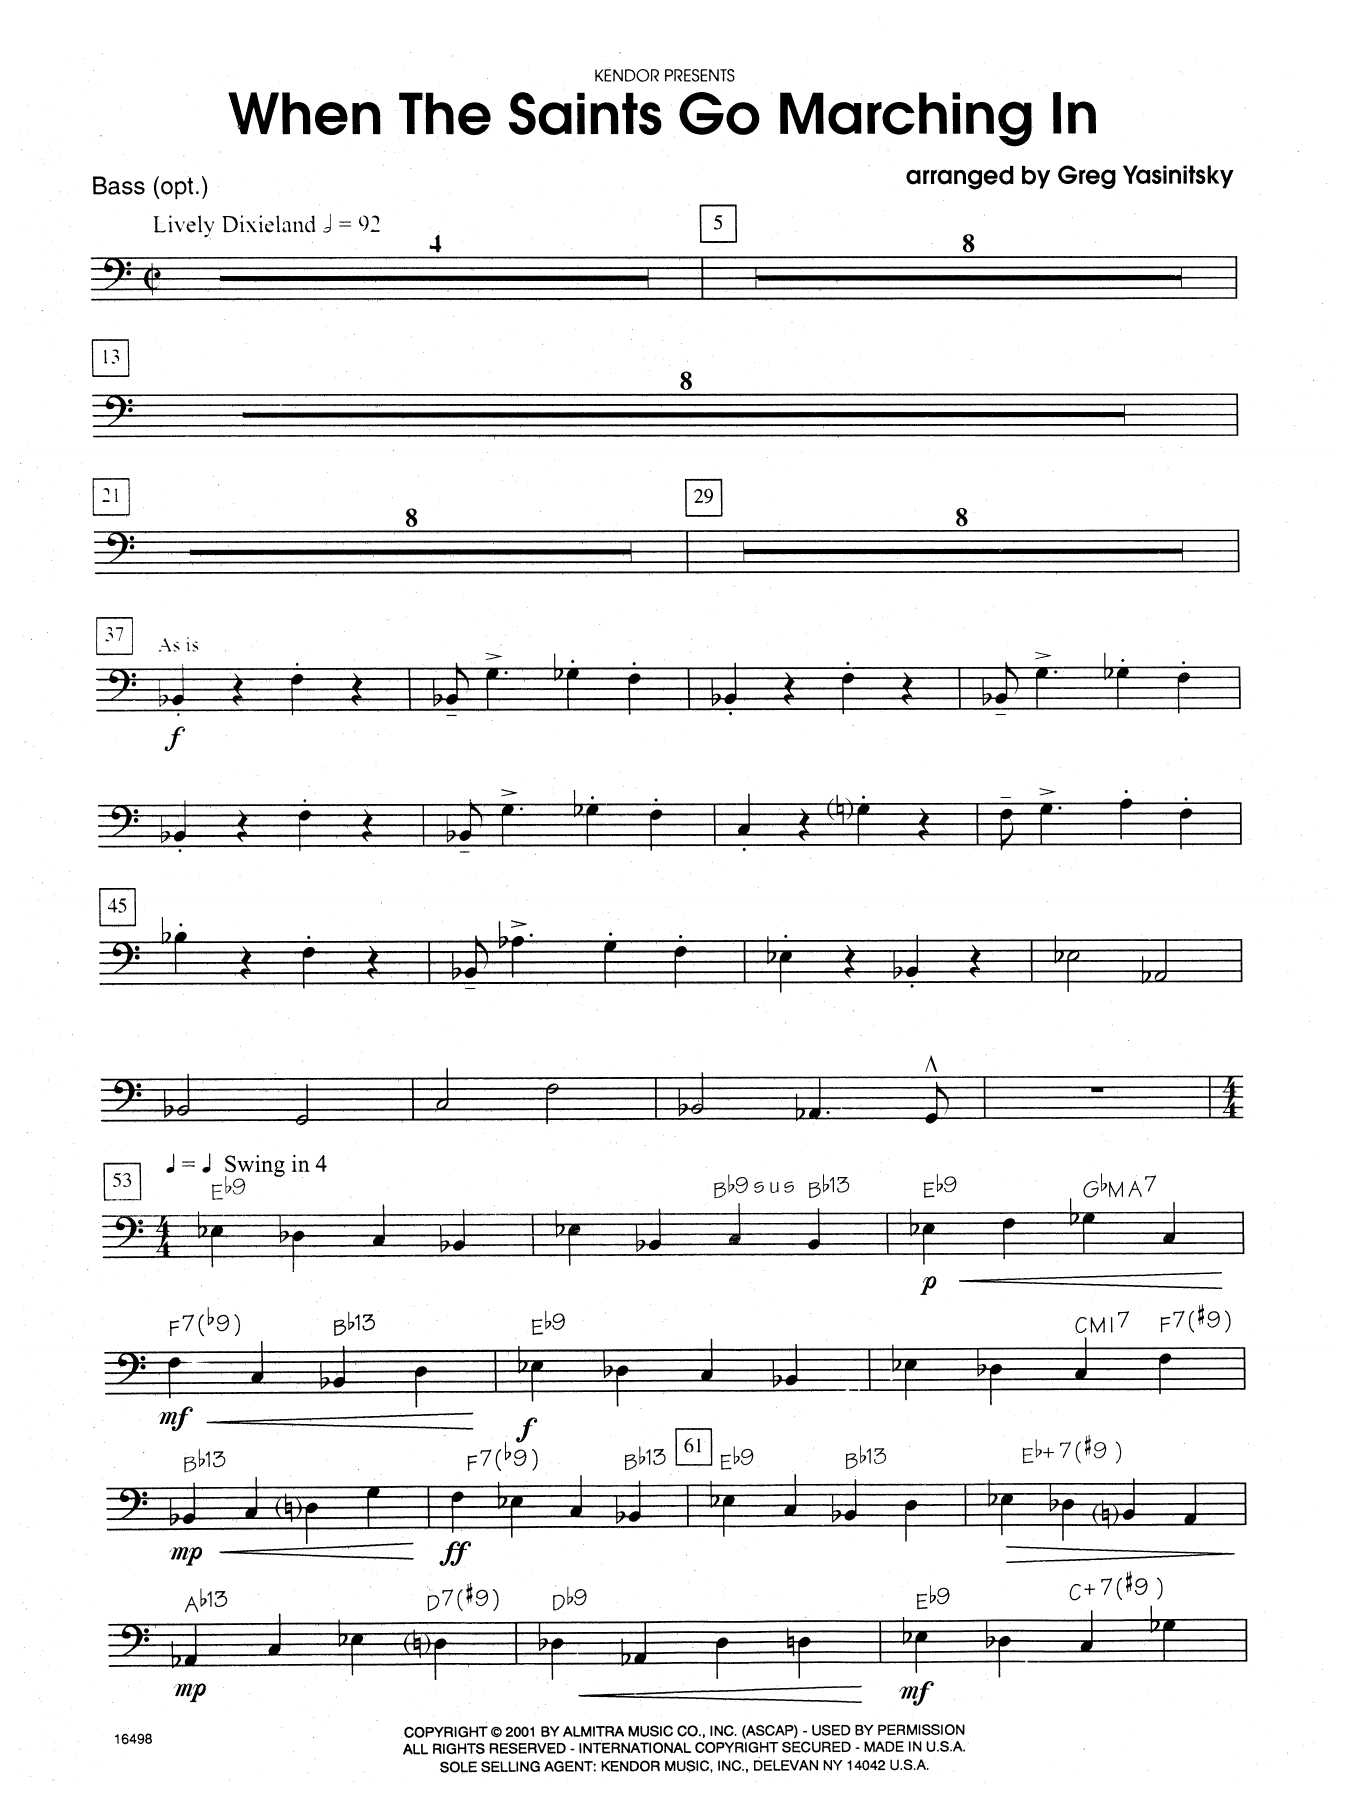 Gregory Yasinitsky When the Saints Go Marching In - Bass sheet music notes and chords. Download Printable PDF.